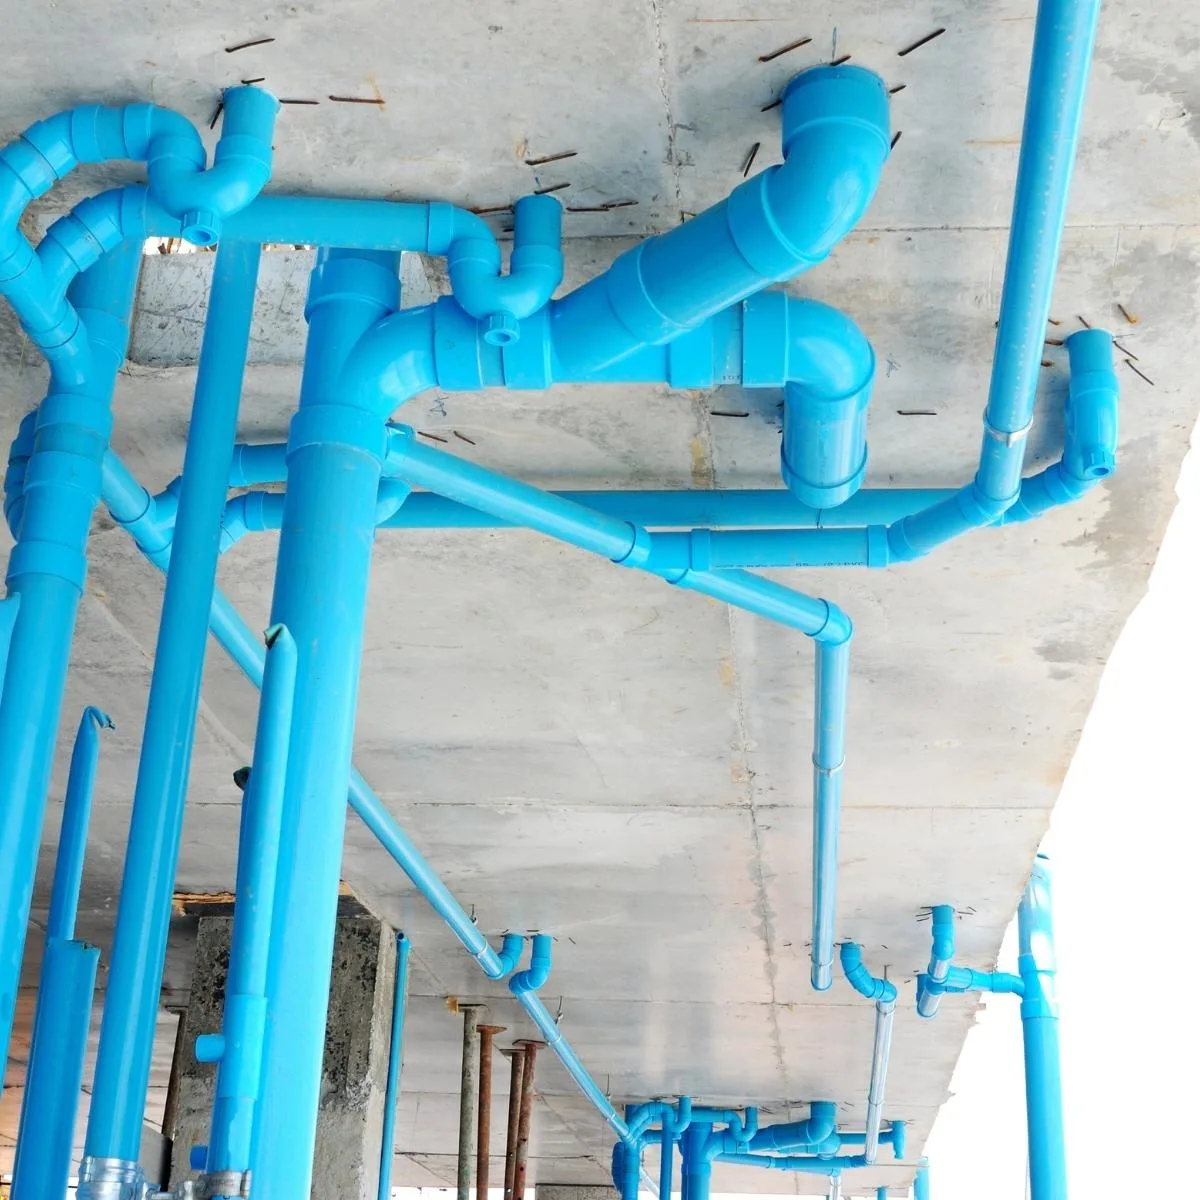 bright blue painted PVC pipe on underside of outdoor concrete structure